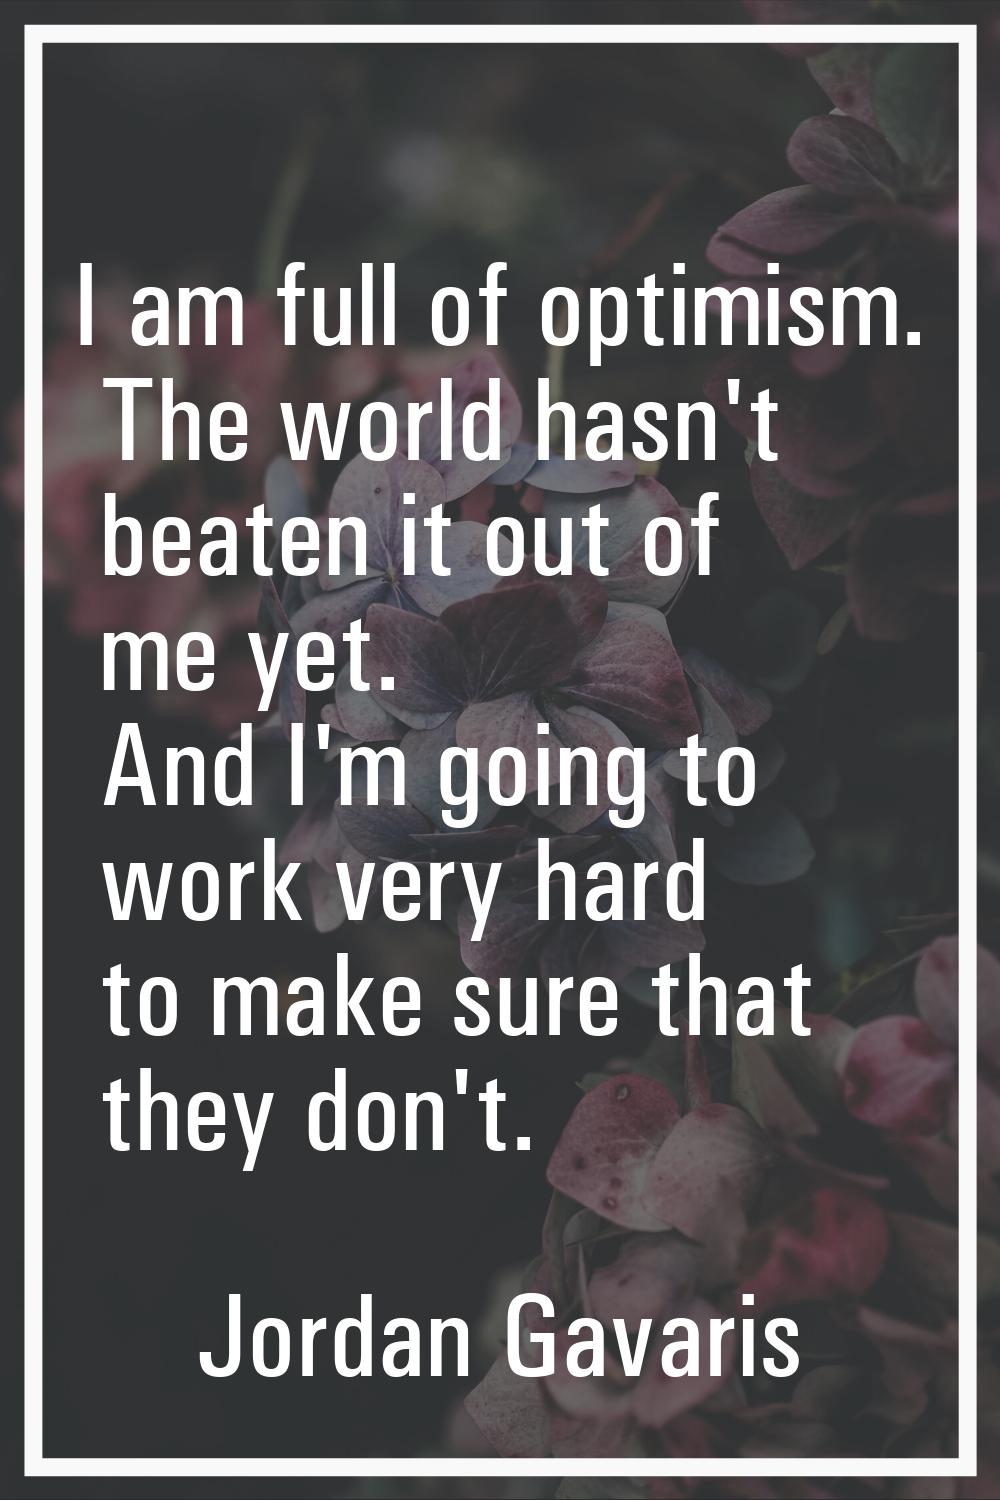 I am full of optimism. The world hasn't beaten it out of me yet. And I'm going to work very hard to